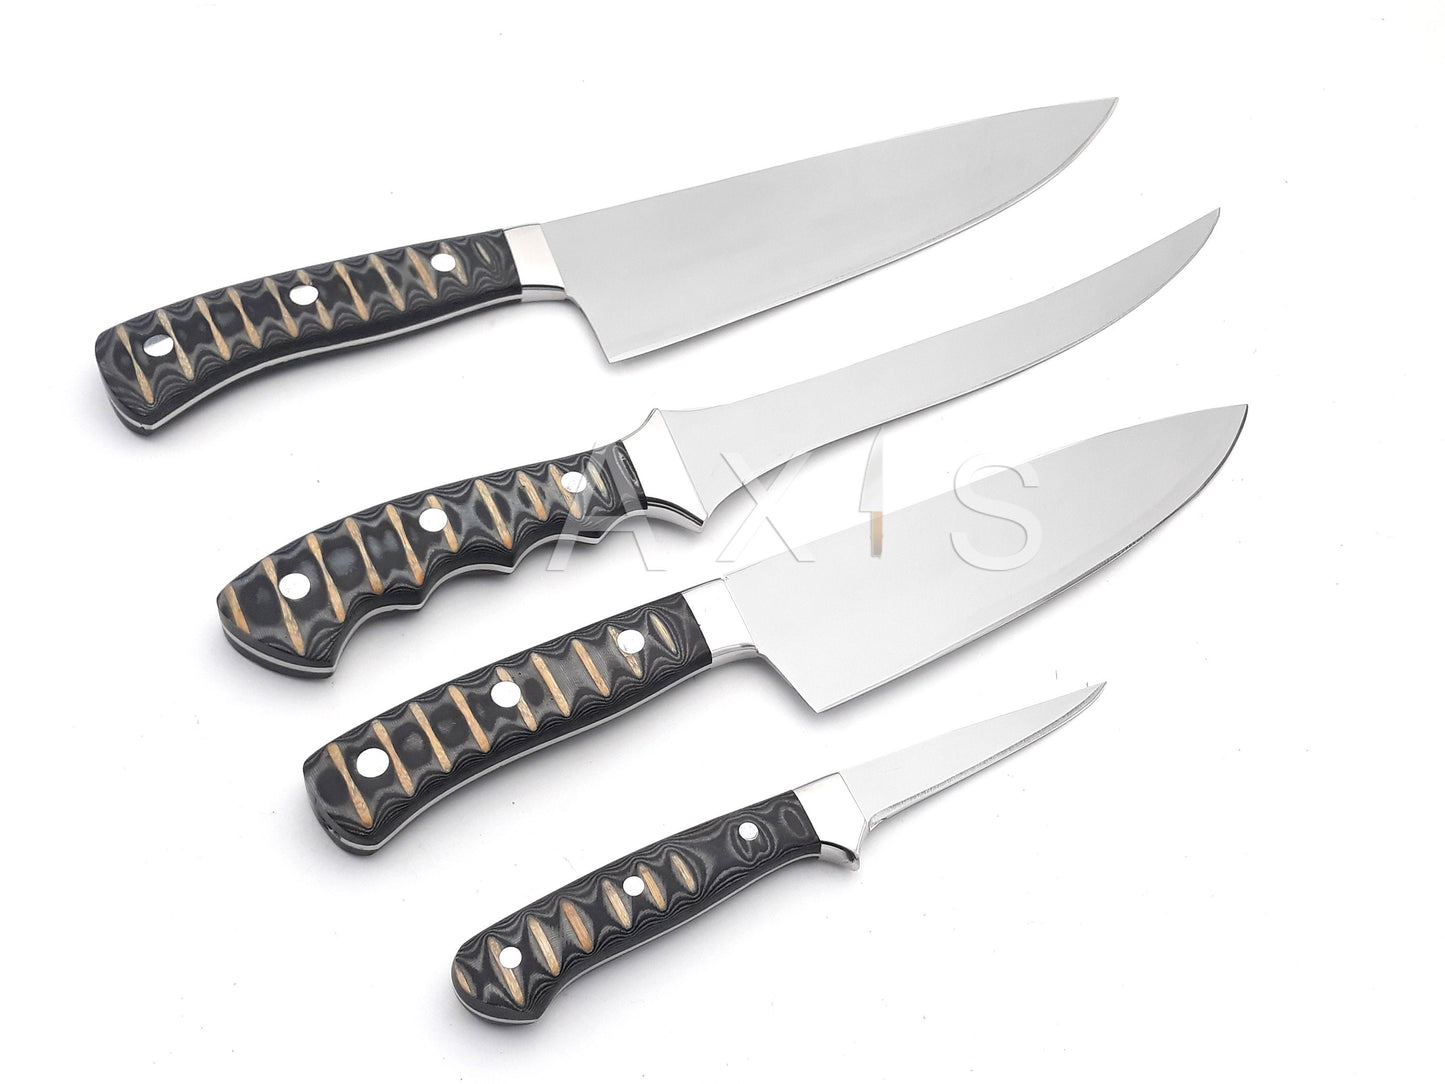 Kitchen Knife Set 4pc |12c27 Stainless Steel Chef Knife set | Chef Knife Set |Handmade & Hand-forged |Anniversary Gift |Butcher Knife | Axis Knives Company